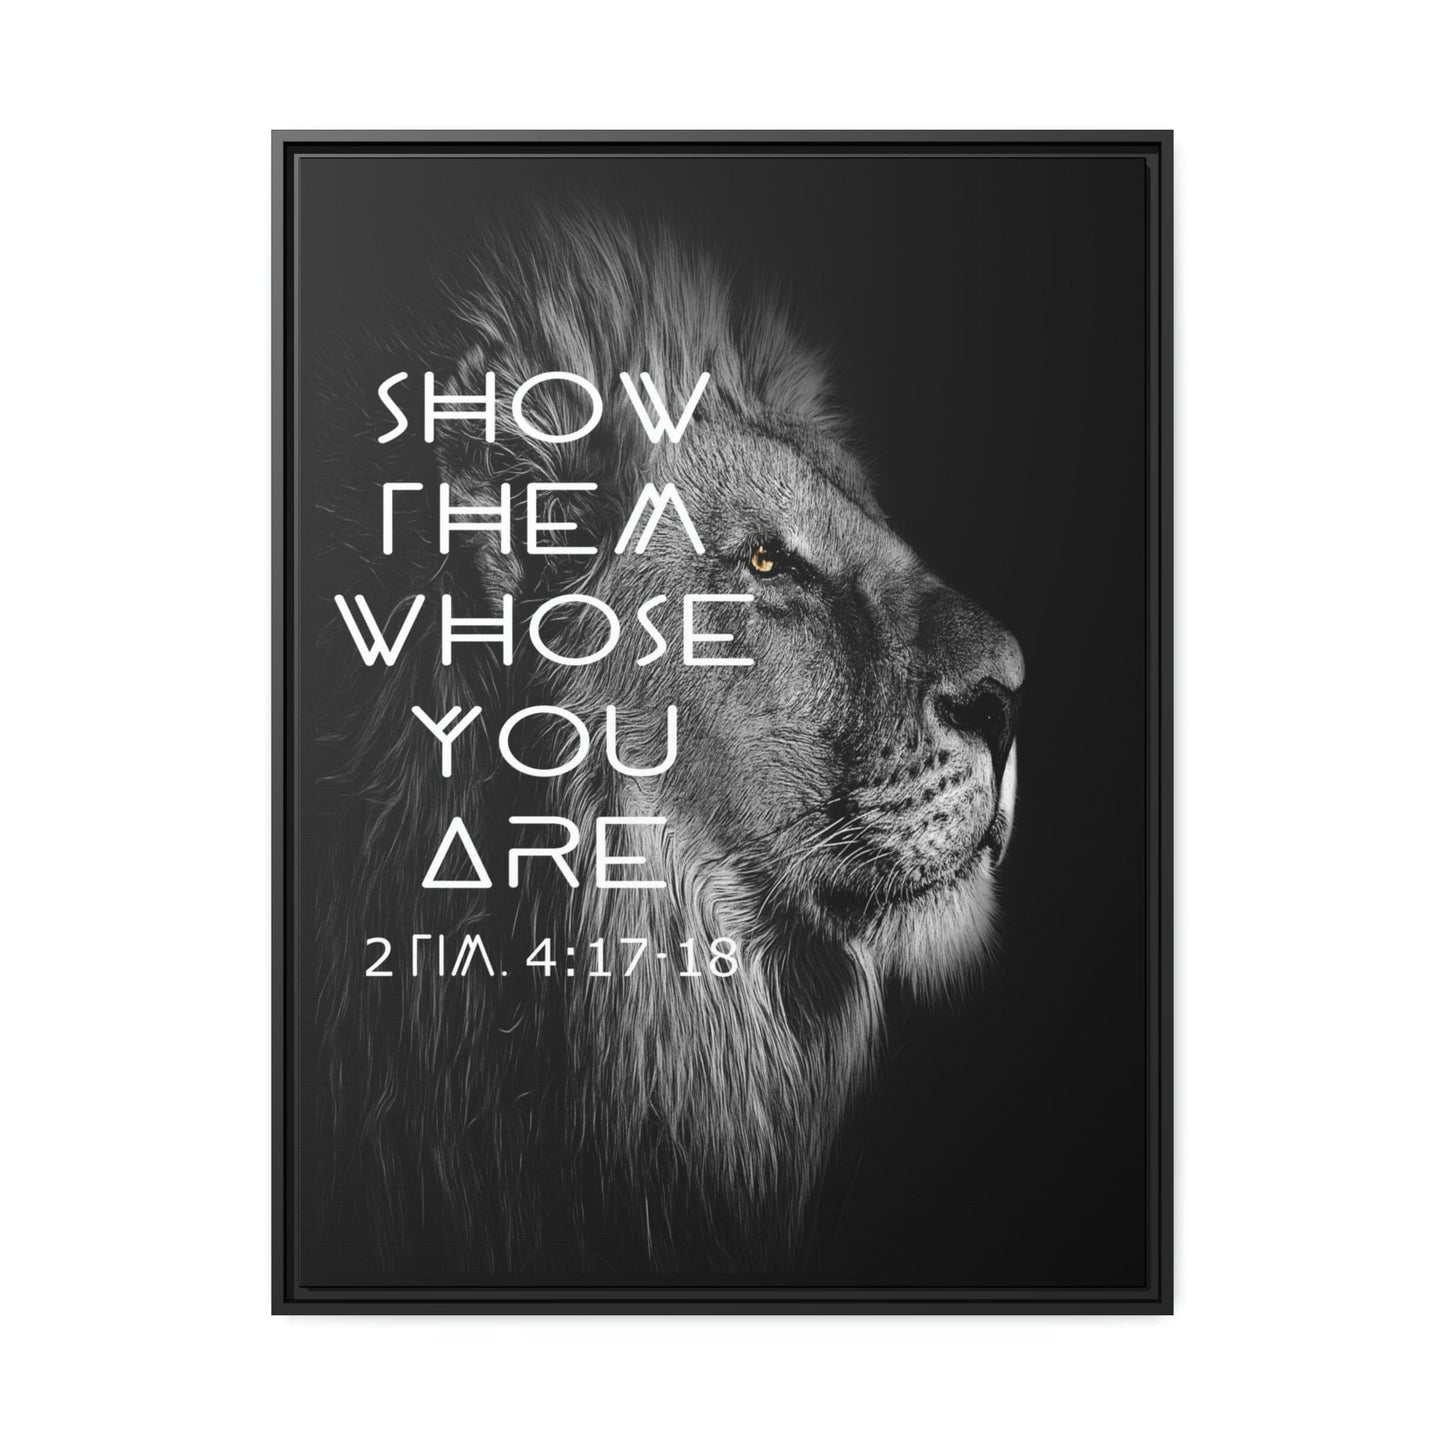 Printify Canvas 30" x 40" (Vertical) / Black / 1.25" Show Them Whose You Are - 2 Tim 4:17-18 Christian Canvas Wall Art